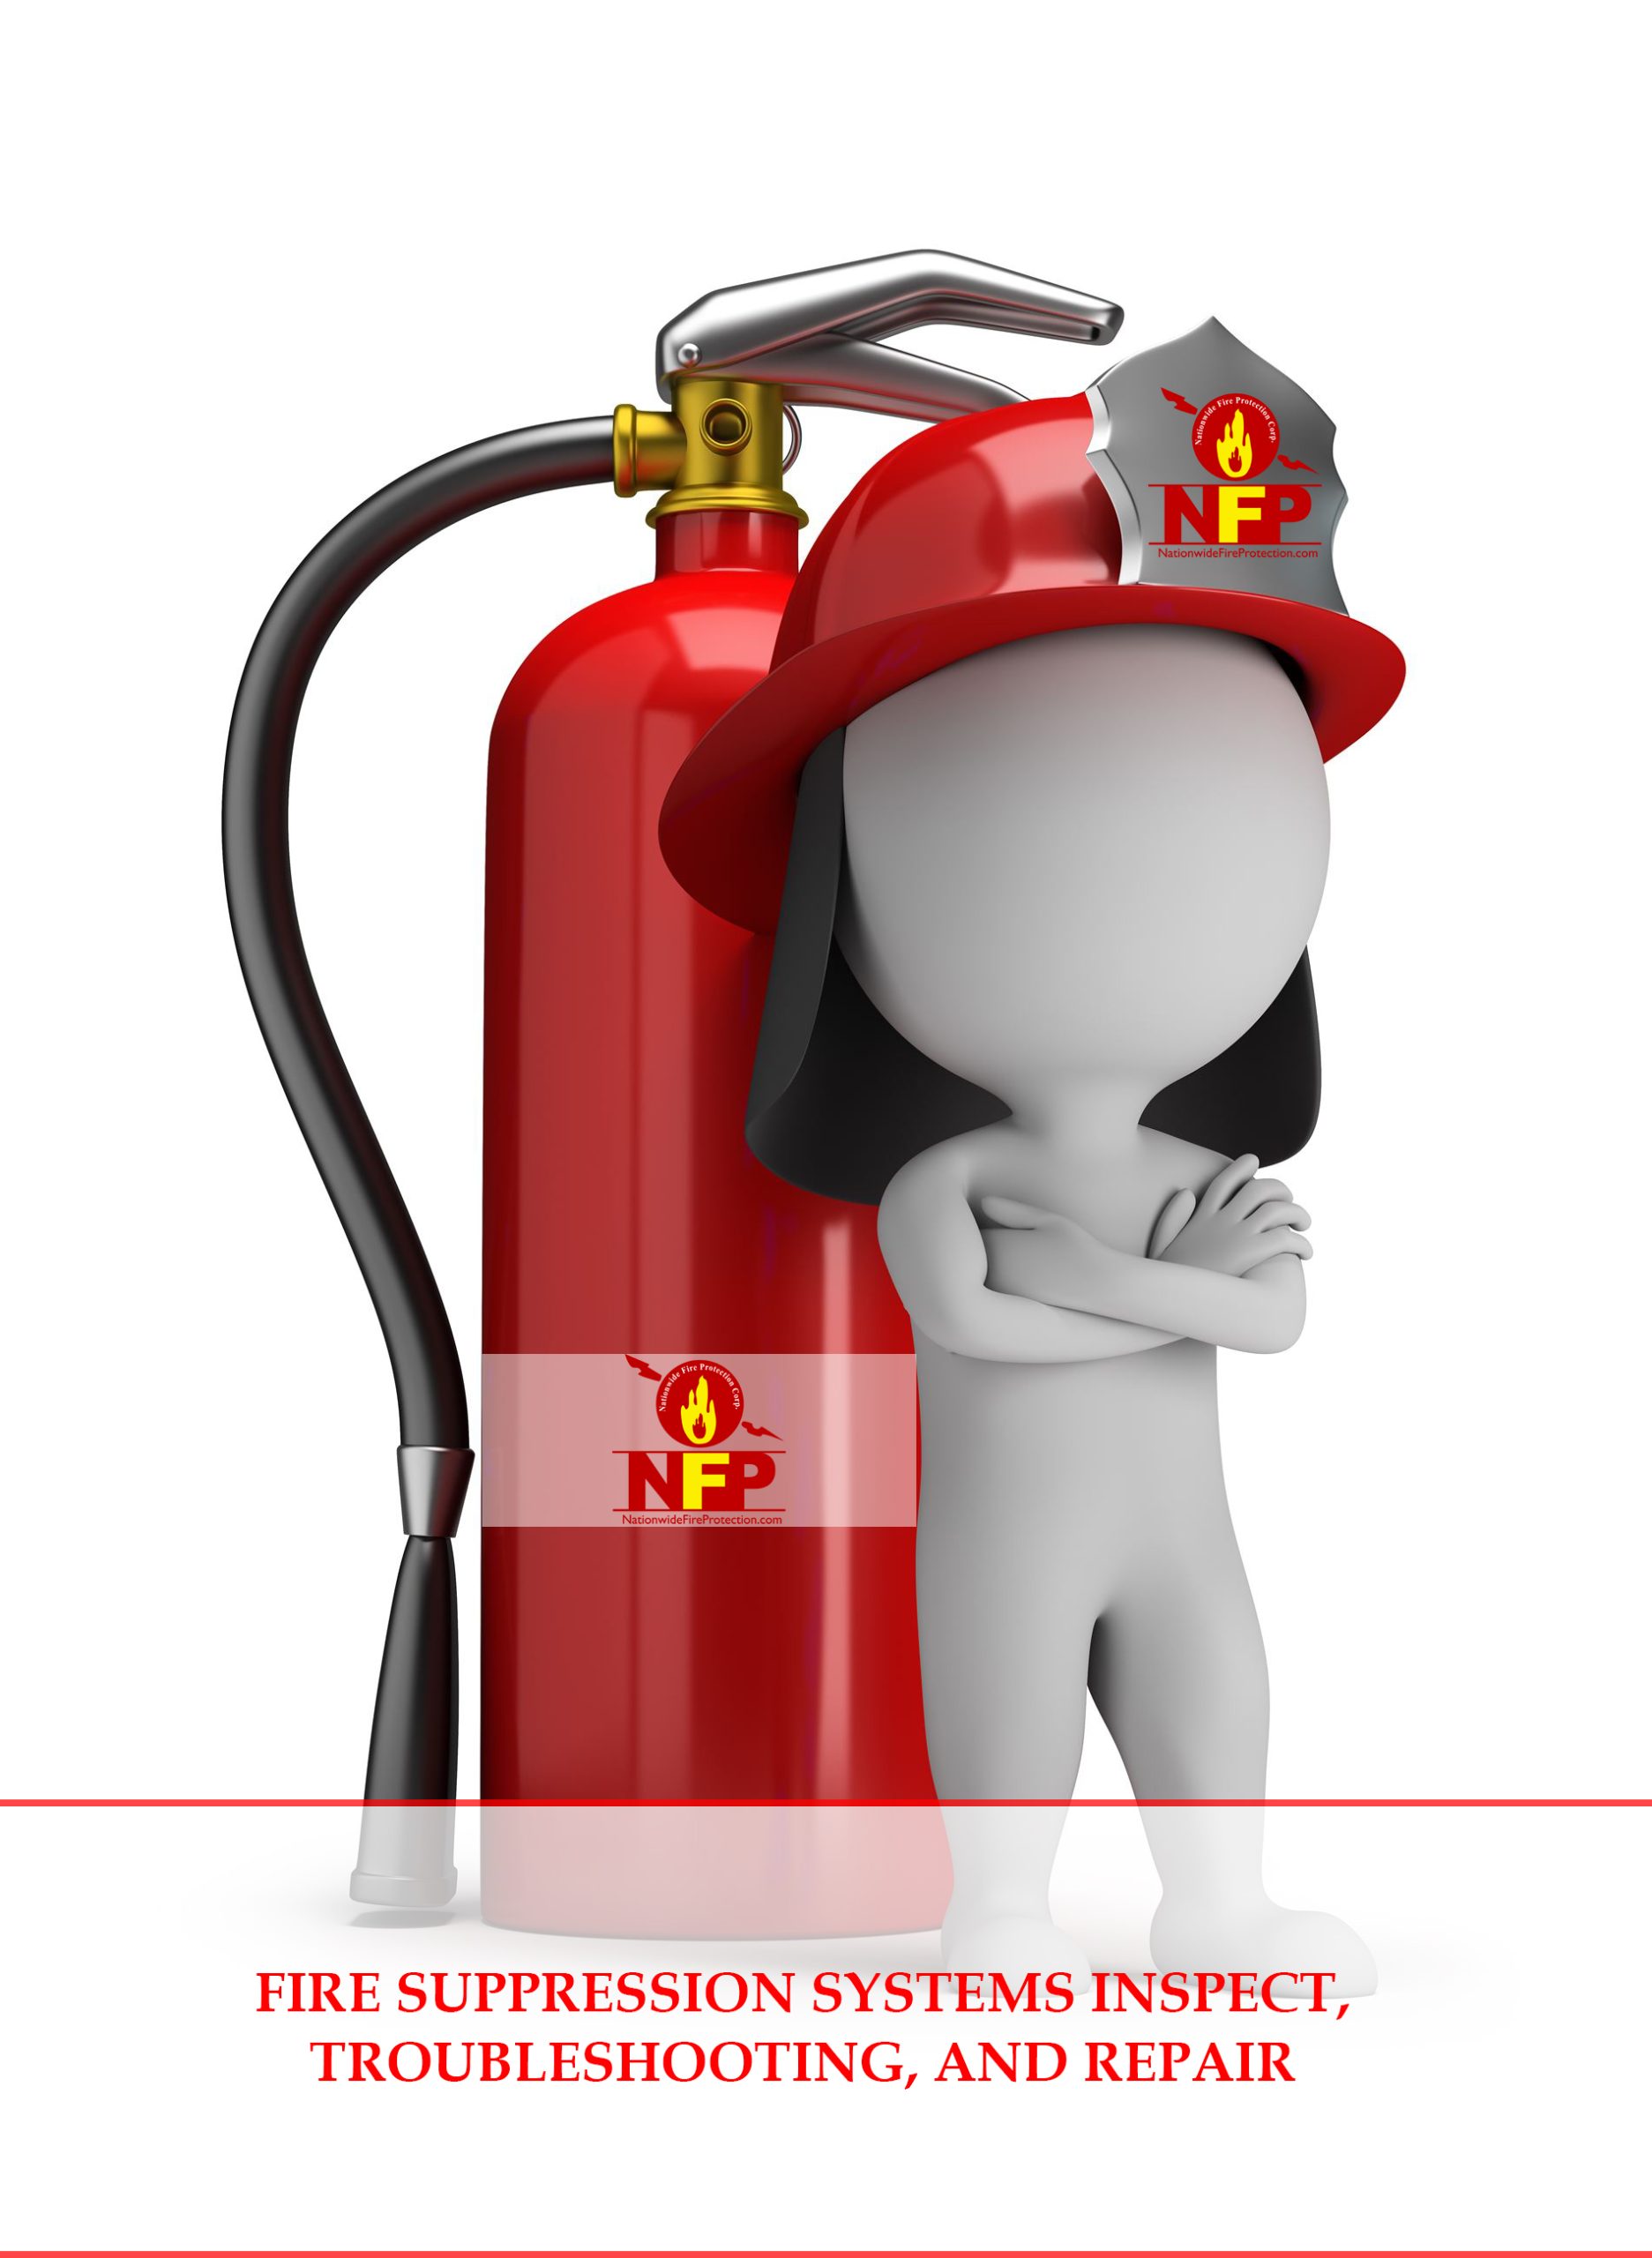 Restaurant Fire Suppression Systems Inspect, Troubleshooting, and Repair